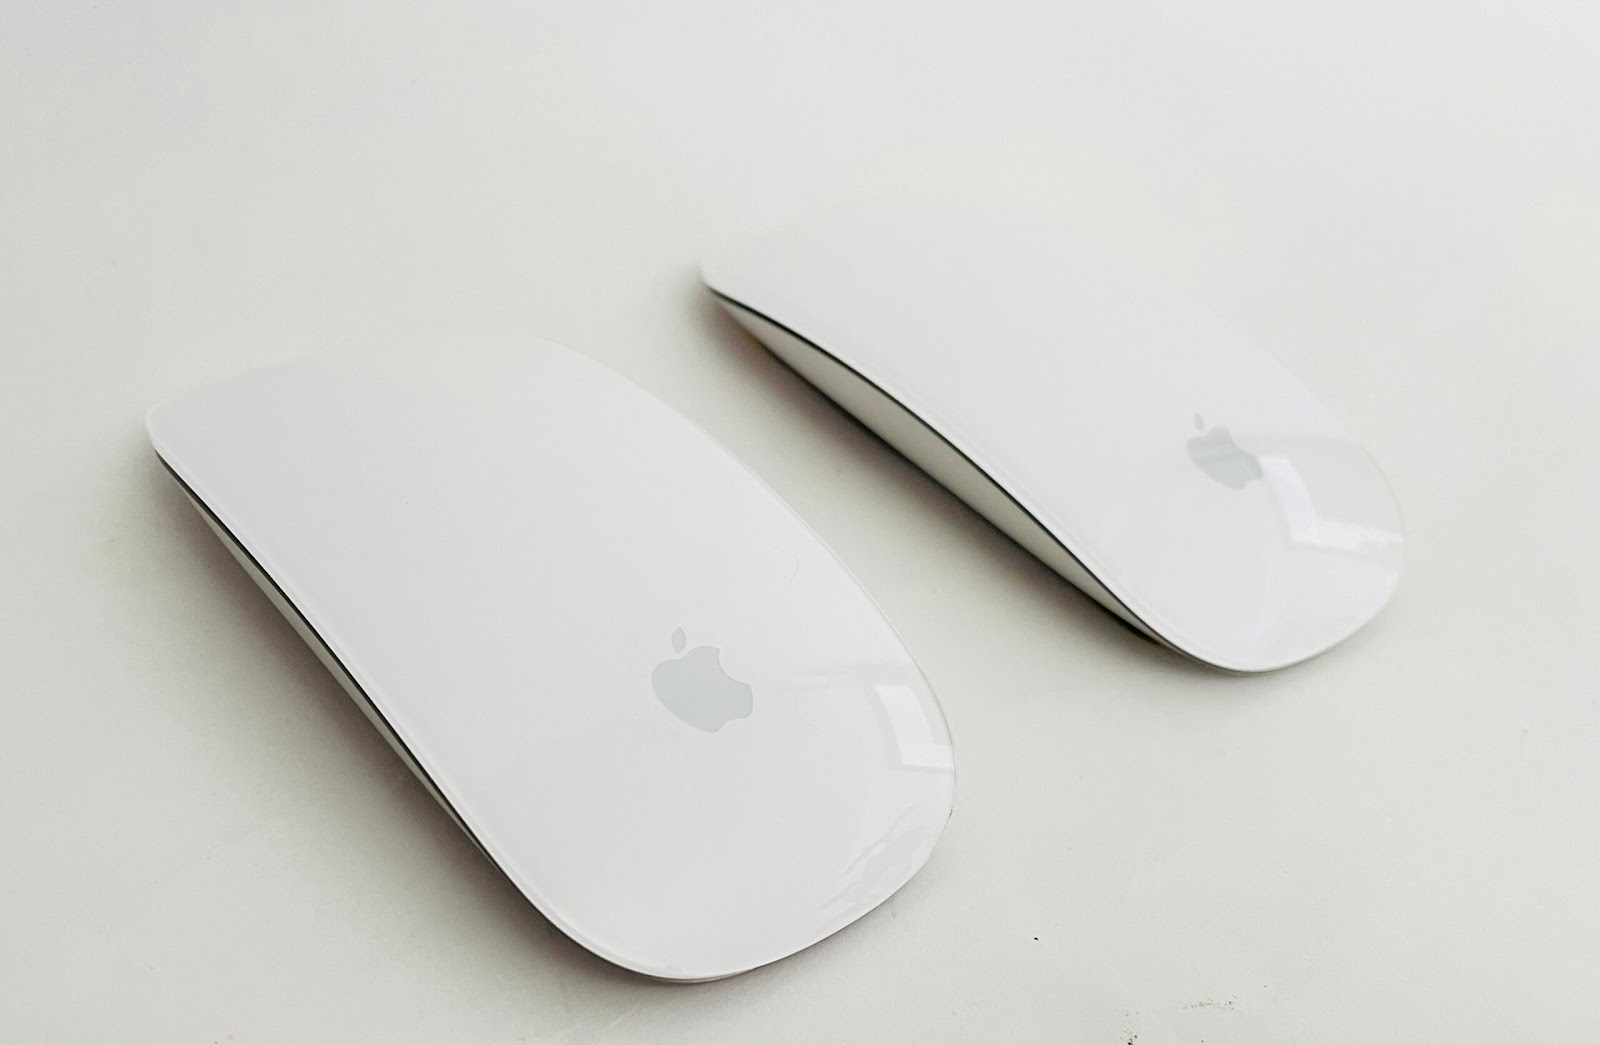 Why Does Apple Install The Charging Port At The Bottom Of The Magic Mouse